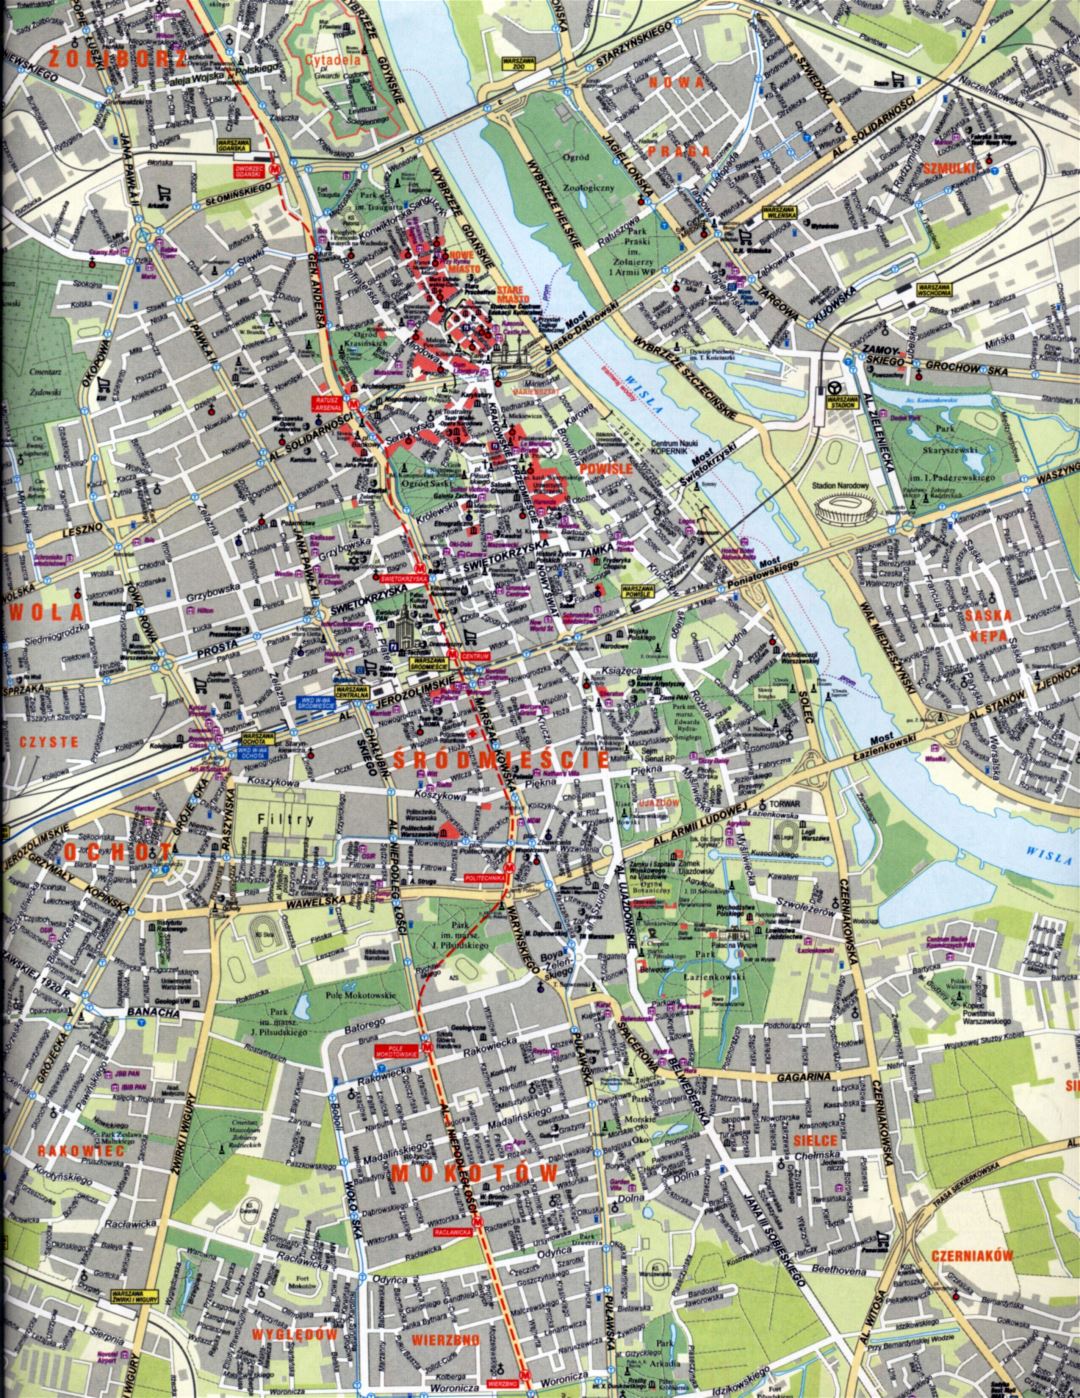 Large road and tourist map of Warsaw city center